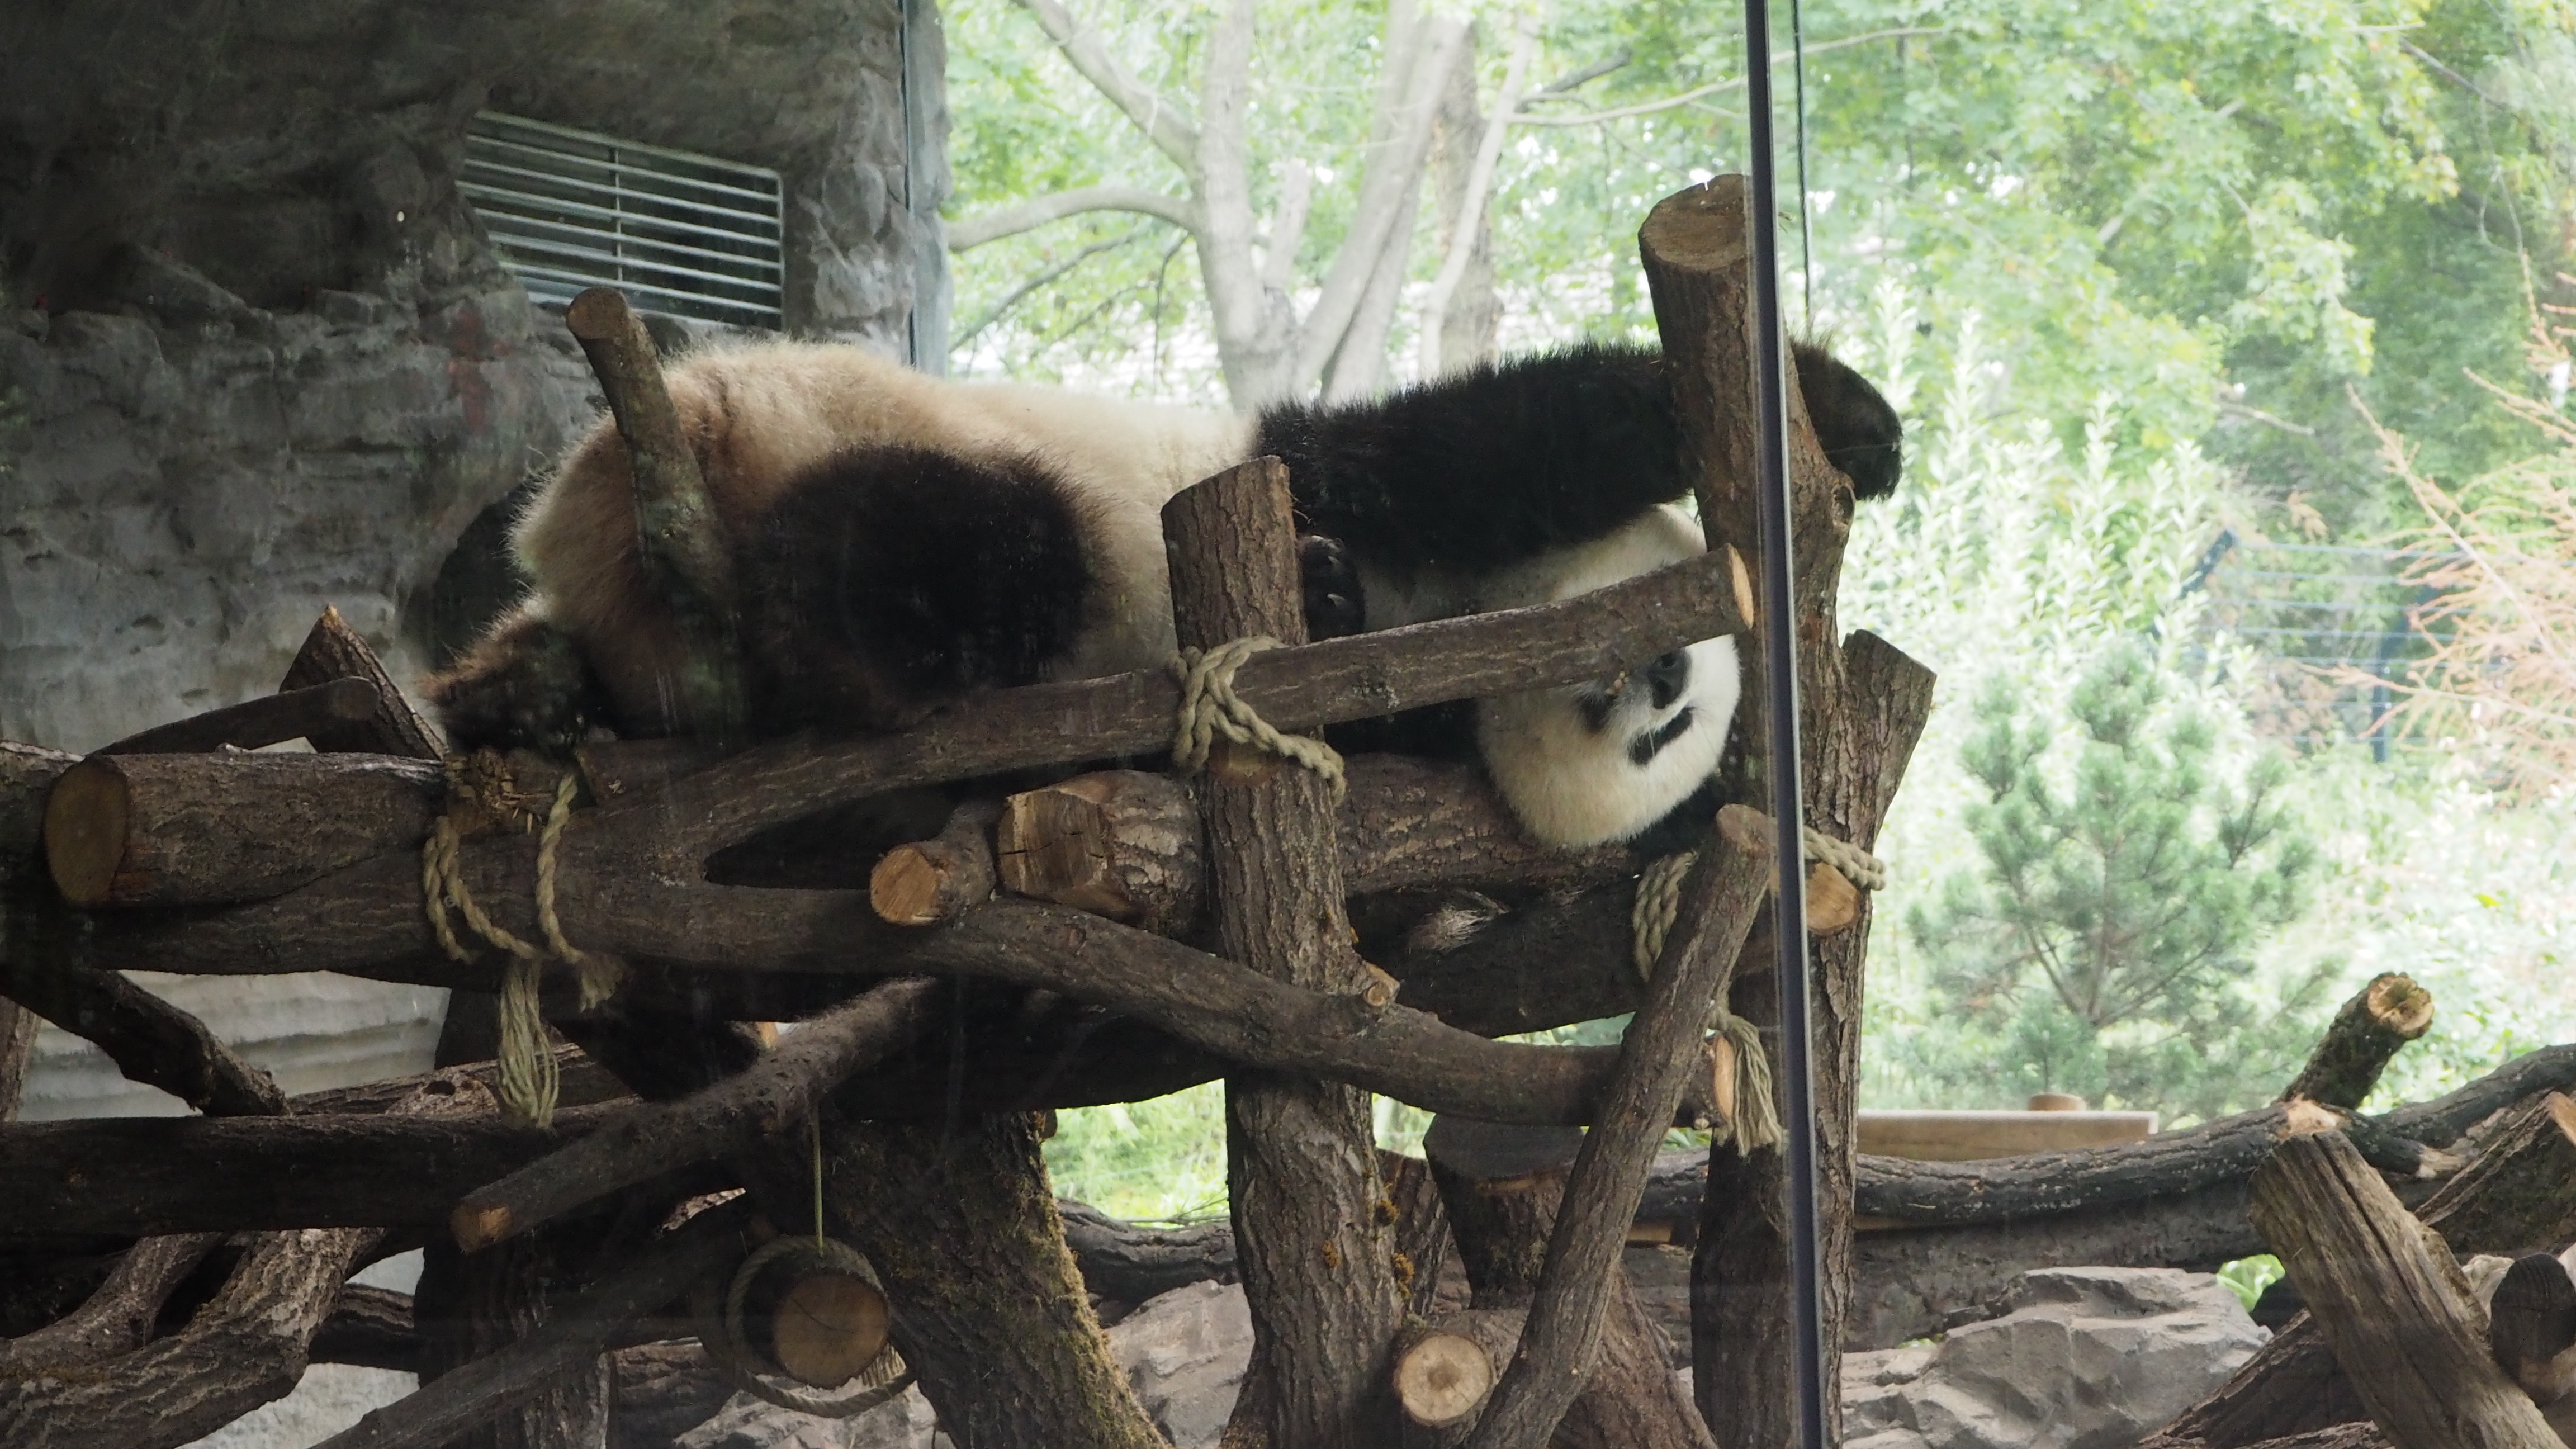 A panda laid on a wooden structure, half asleep